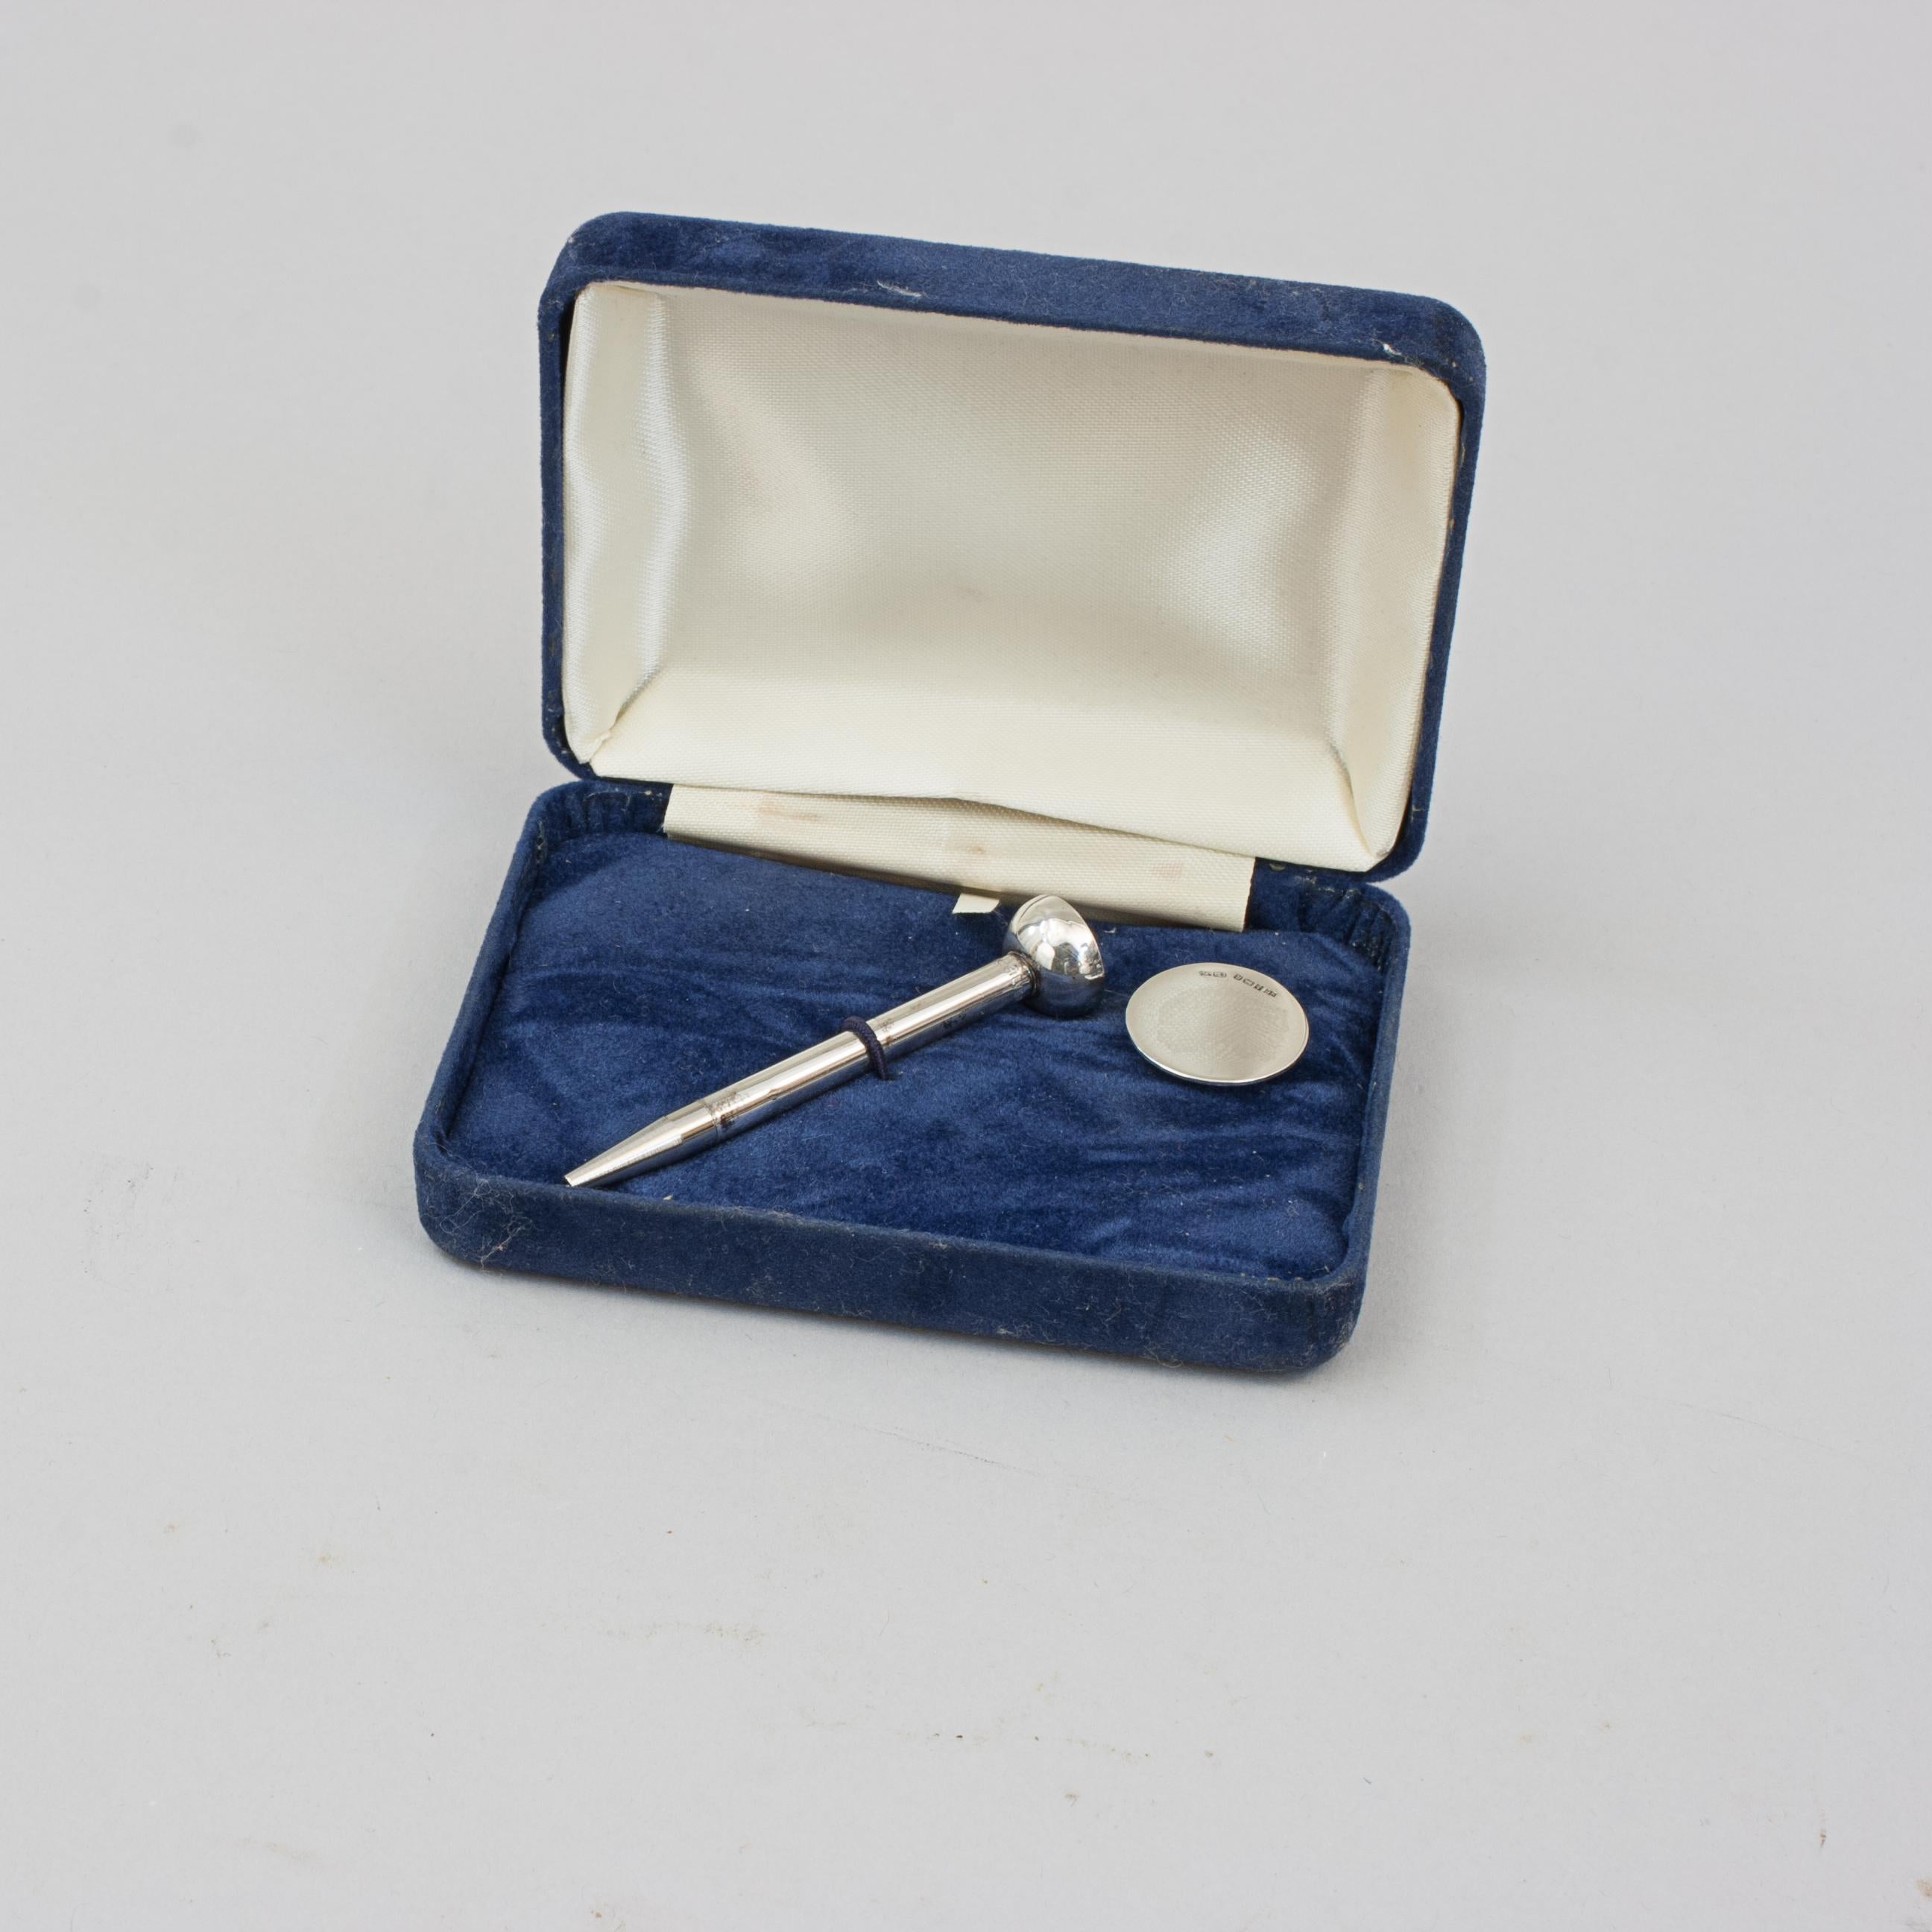 William Manton Silver Golf Ball Marker & Propelling Golf Tee Pencil.
A wonderful hallmarked sterling silver golf tee and marker set, great for the lover of golf. The modern silver ball marker hallmarked Birmingham 1991 and made by William Manton